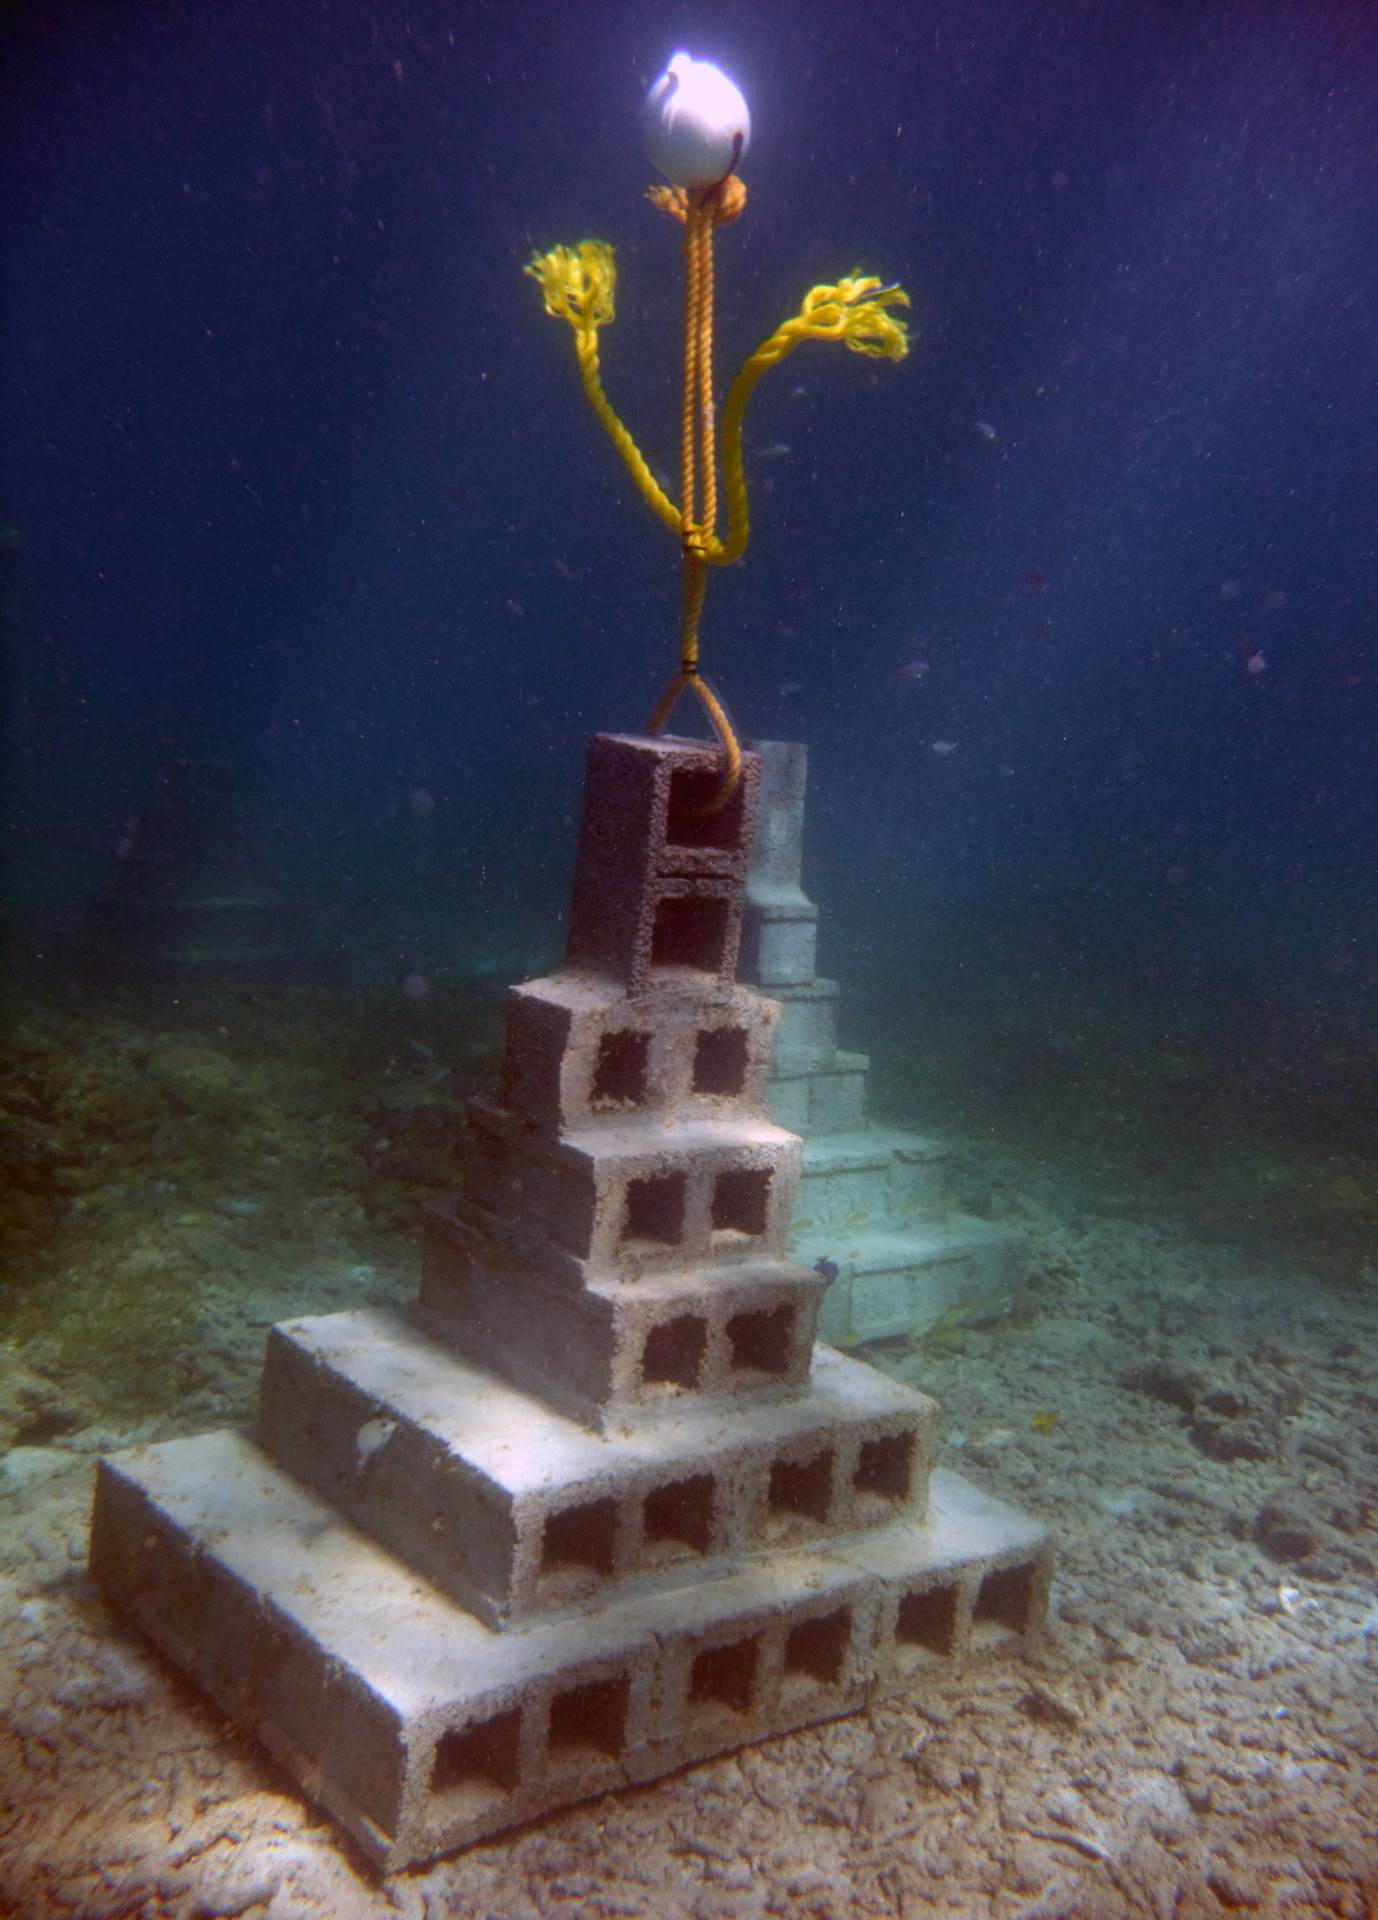 The pyramid design was used because it creates a stable platform in shallow water. Fish, corals, sponges and other types of marine life are expected to quickly propagate the artificial reef.